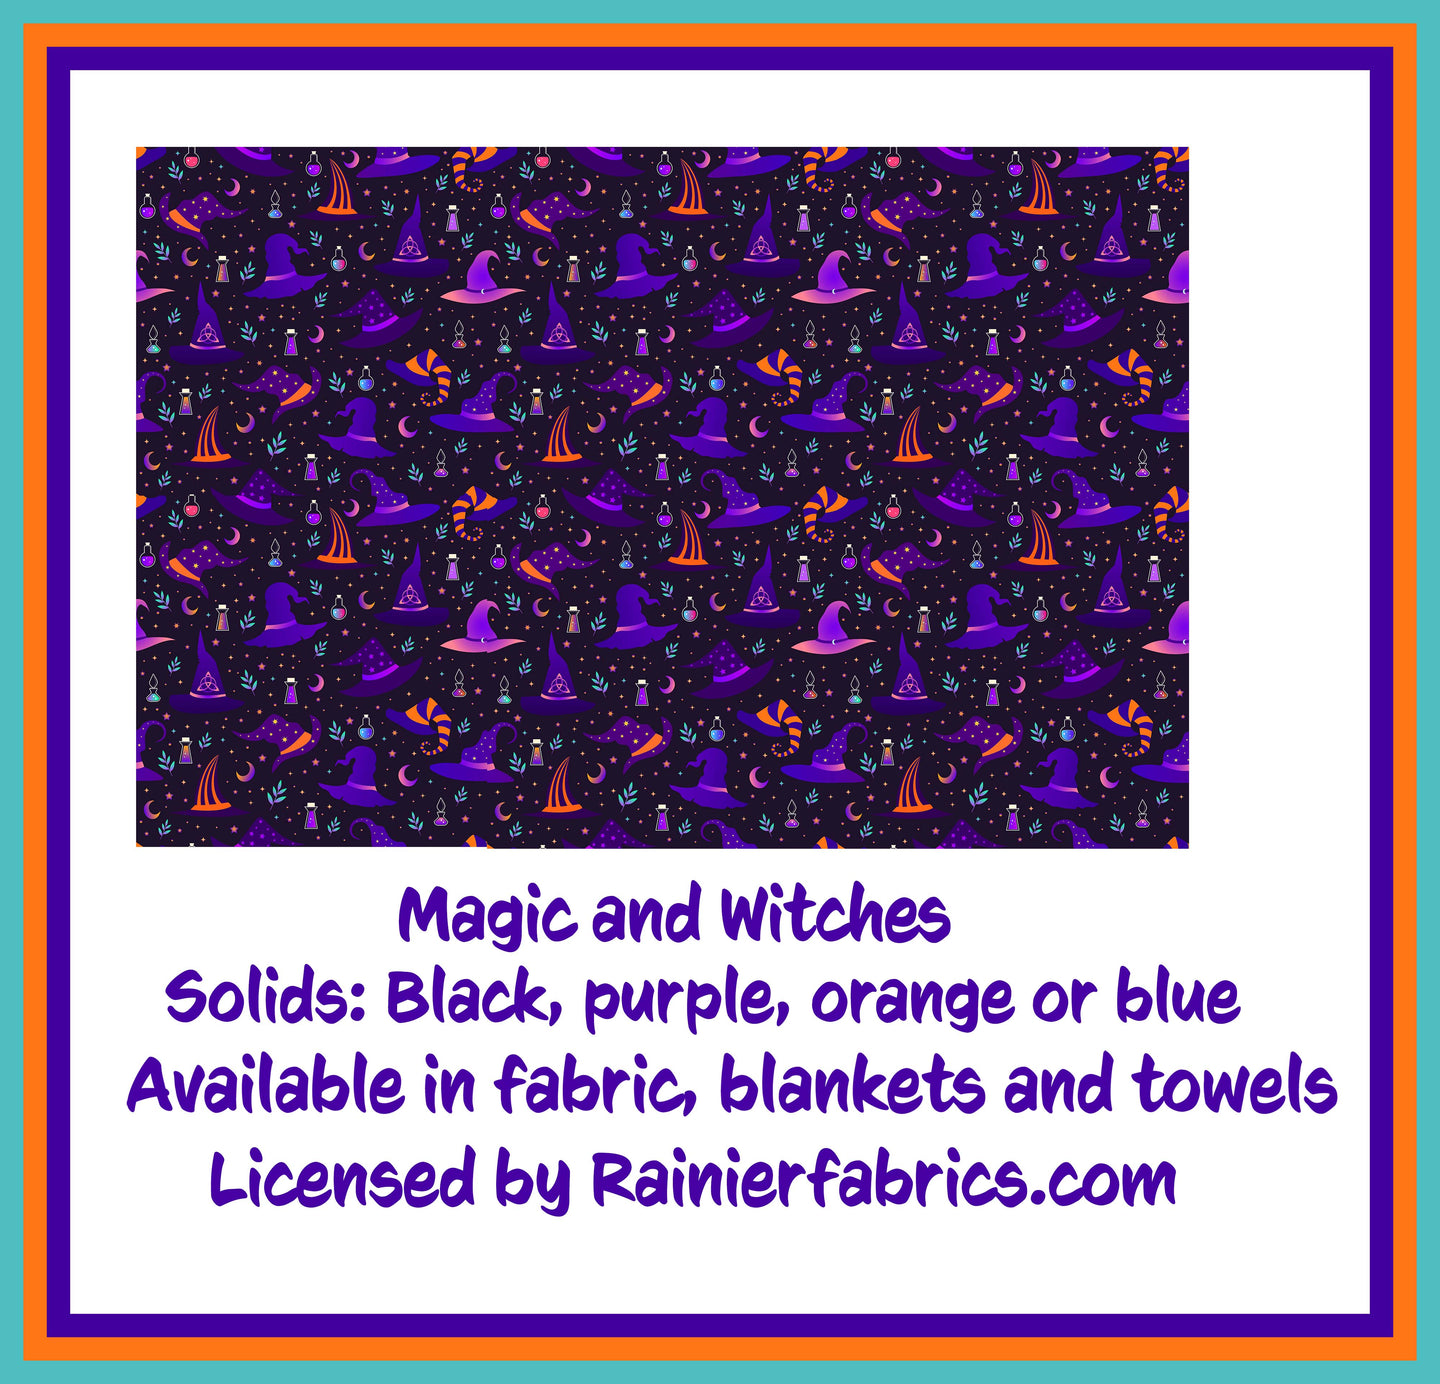 Magic and Witches - 2-5 day turnaround - Order by 1/2 yard; Description of bases below